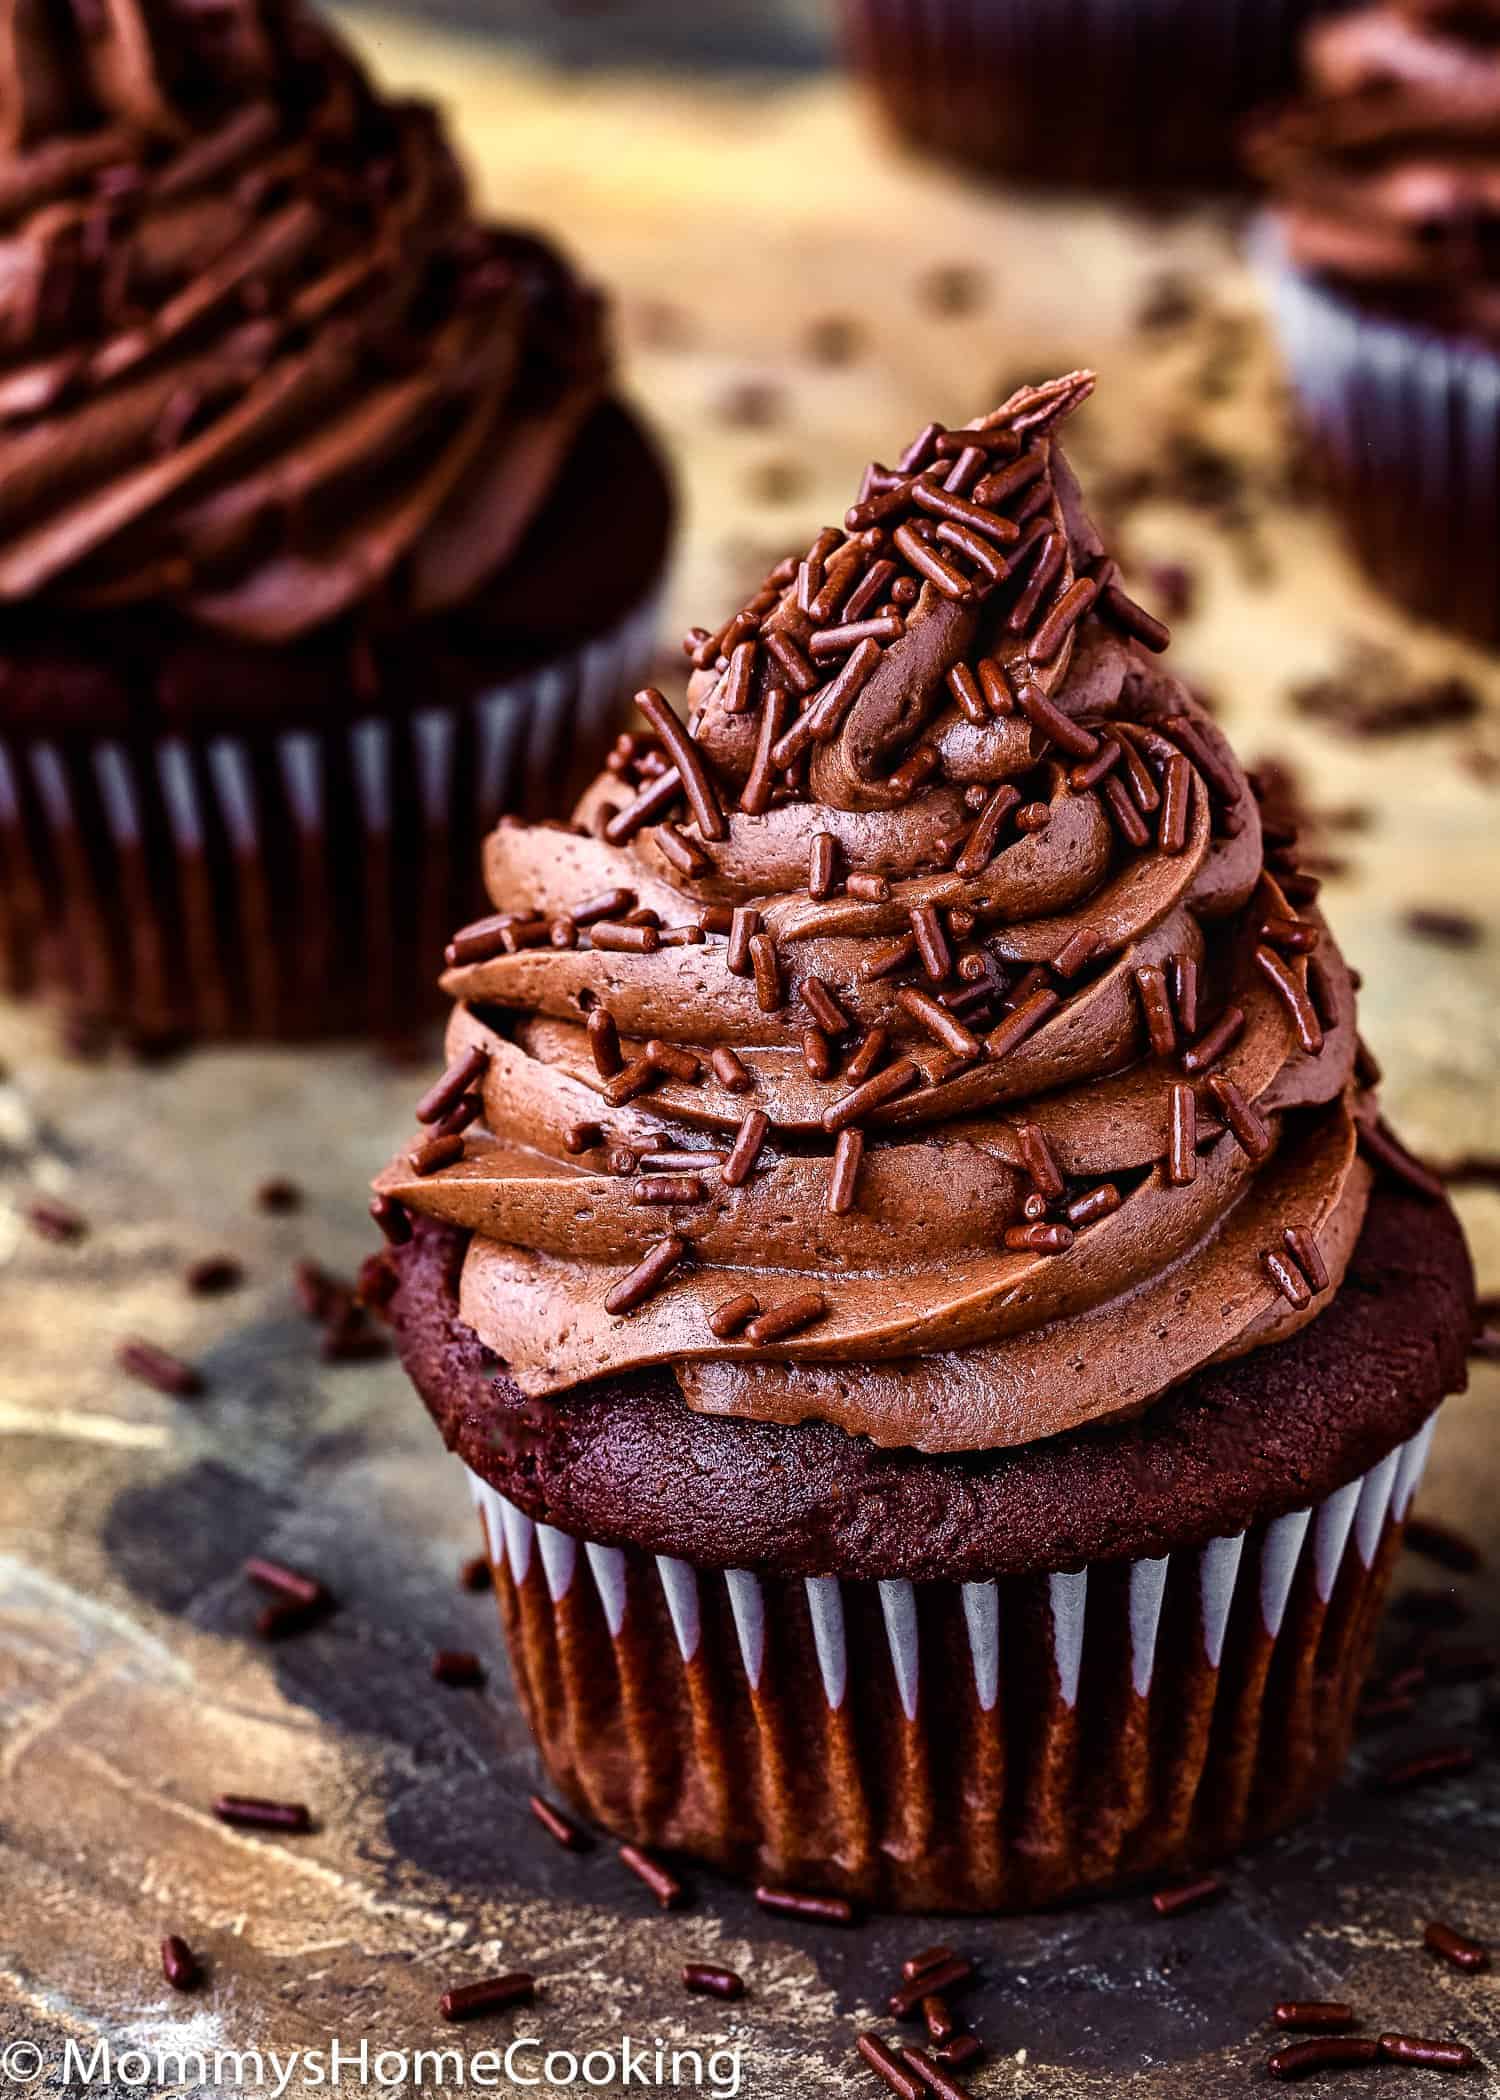 Eggless Chocolate Cupcakes with chocolate frosting and chocolate jimmies.